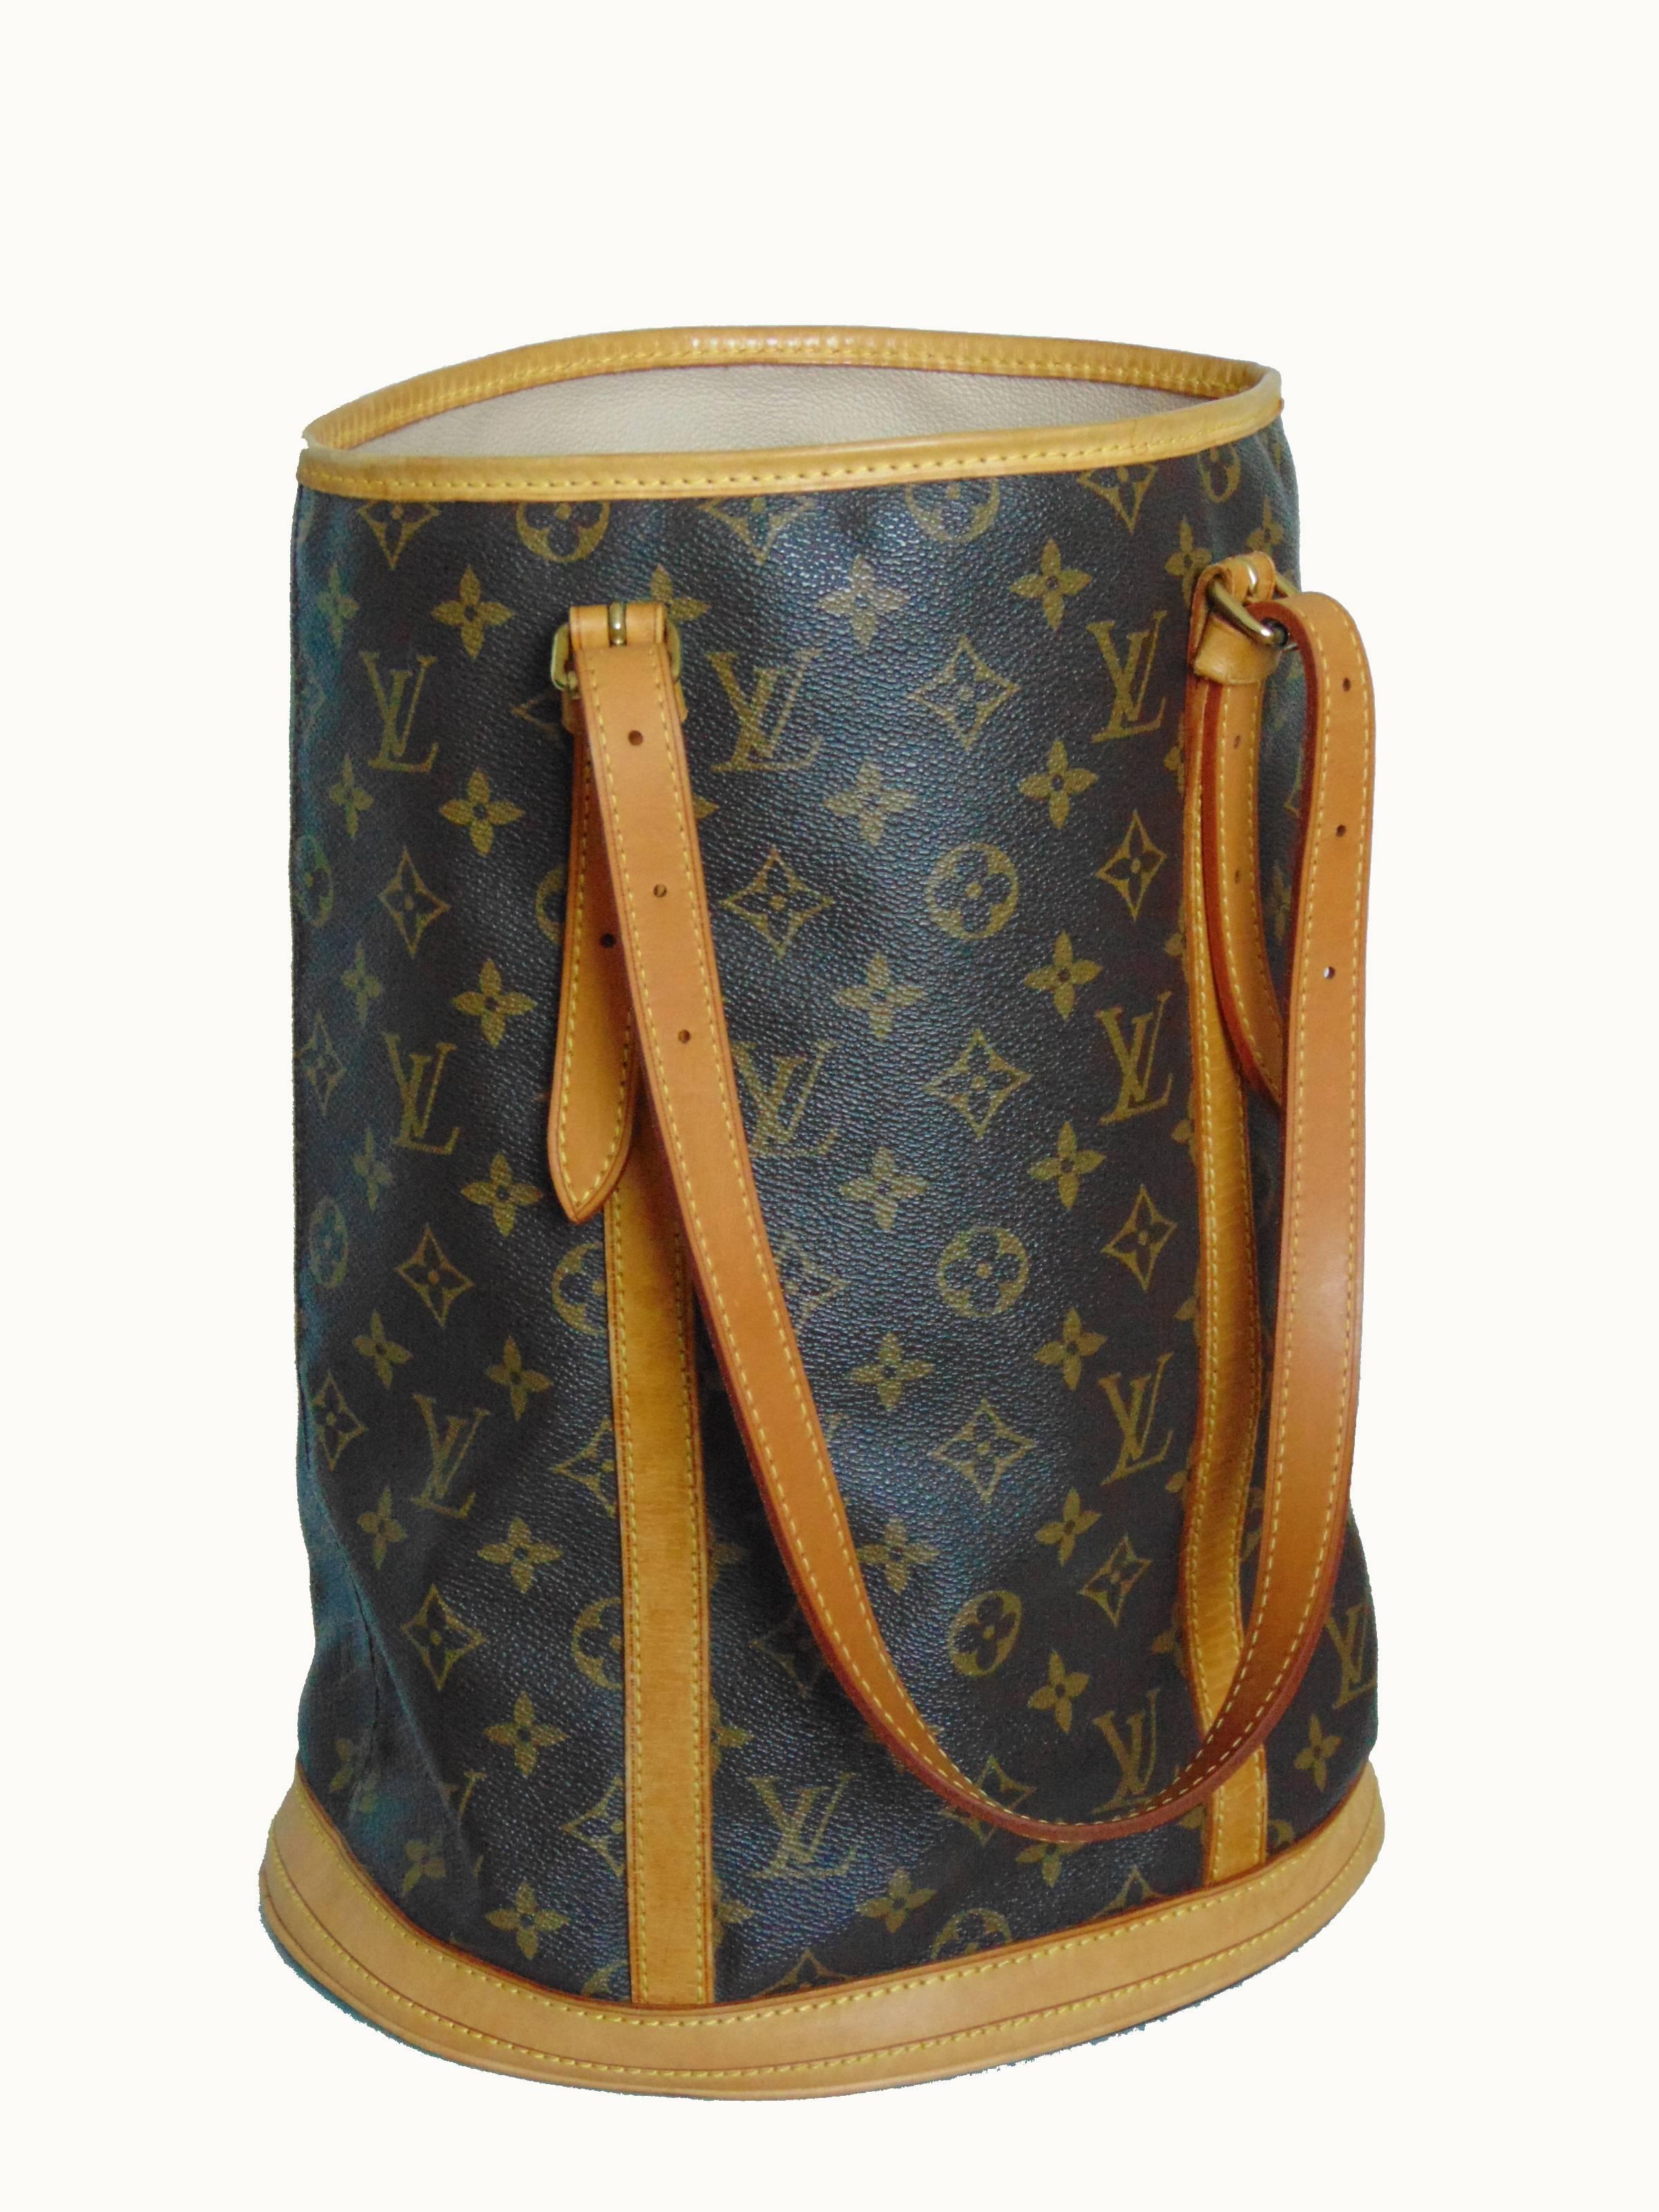 This fabulous bag was made by Louis Vuitton in 2005 and is no longer in production.  Made from their signature monogram canvas, this is the bucket bag GM, the largest size produced in this style.  It's trimmed in vachetta leather, lined in cream